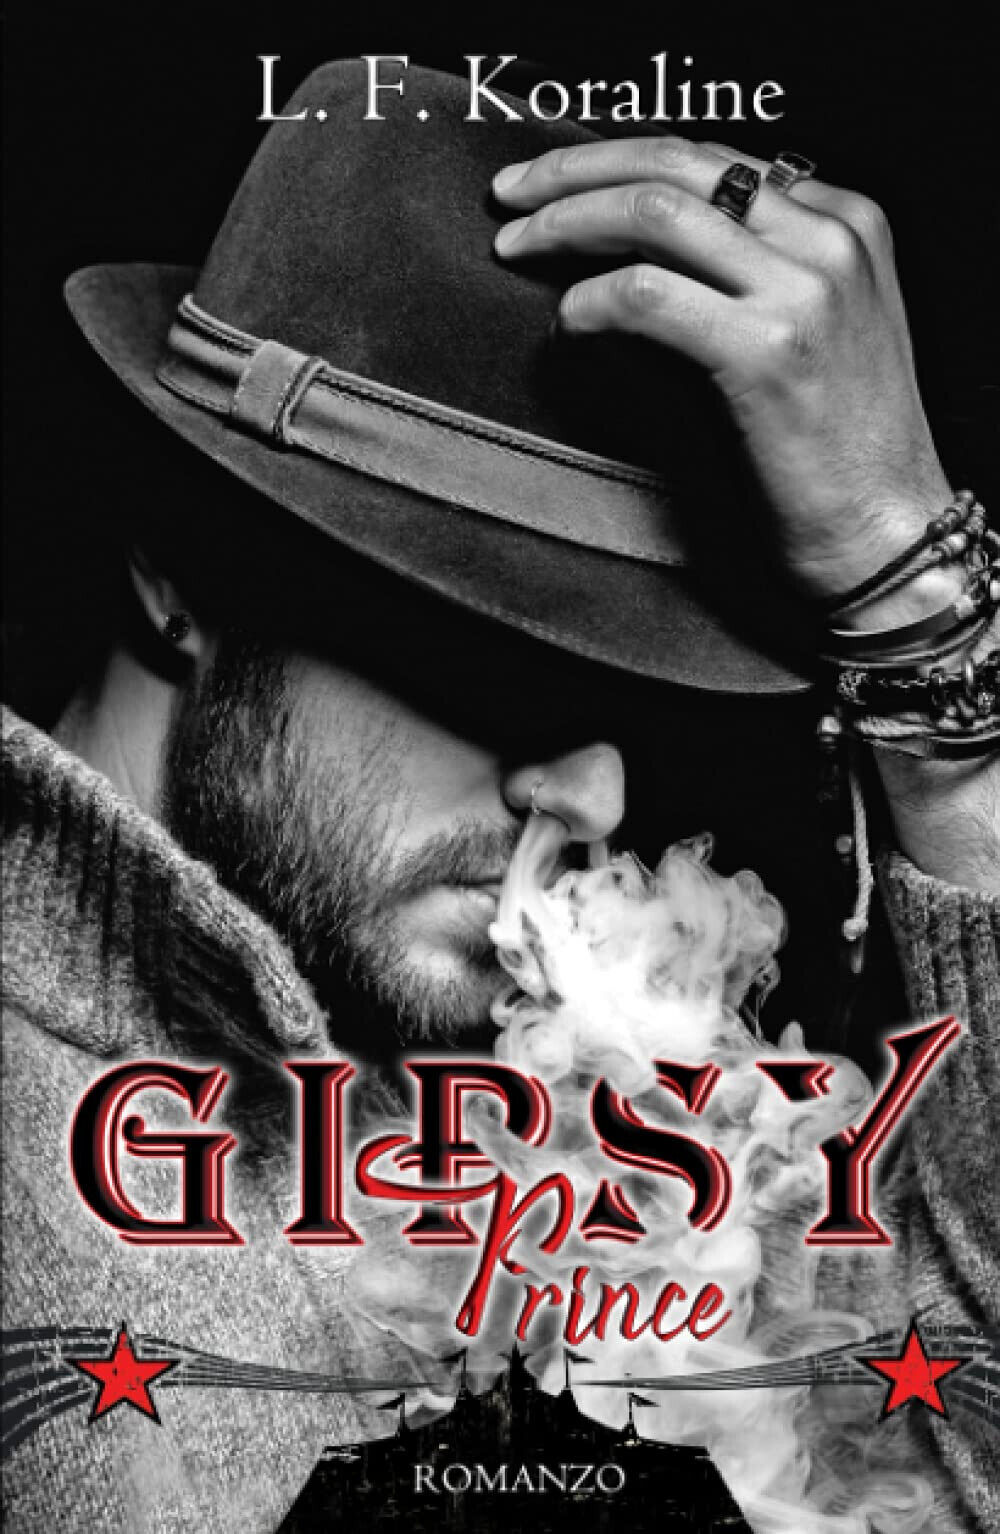 Gipsy Prince: vol. 1 di 2 - L. F. Koraline - Independently published, 2021 libro usato